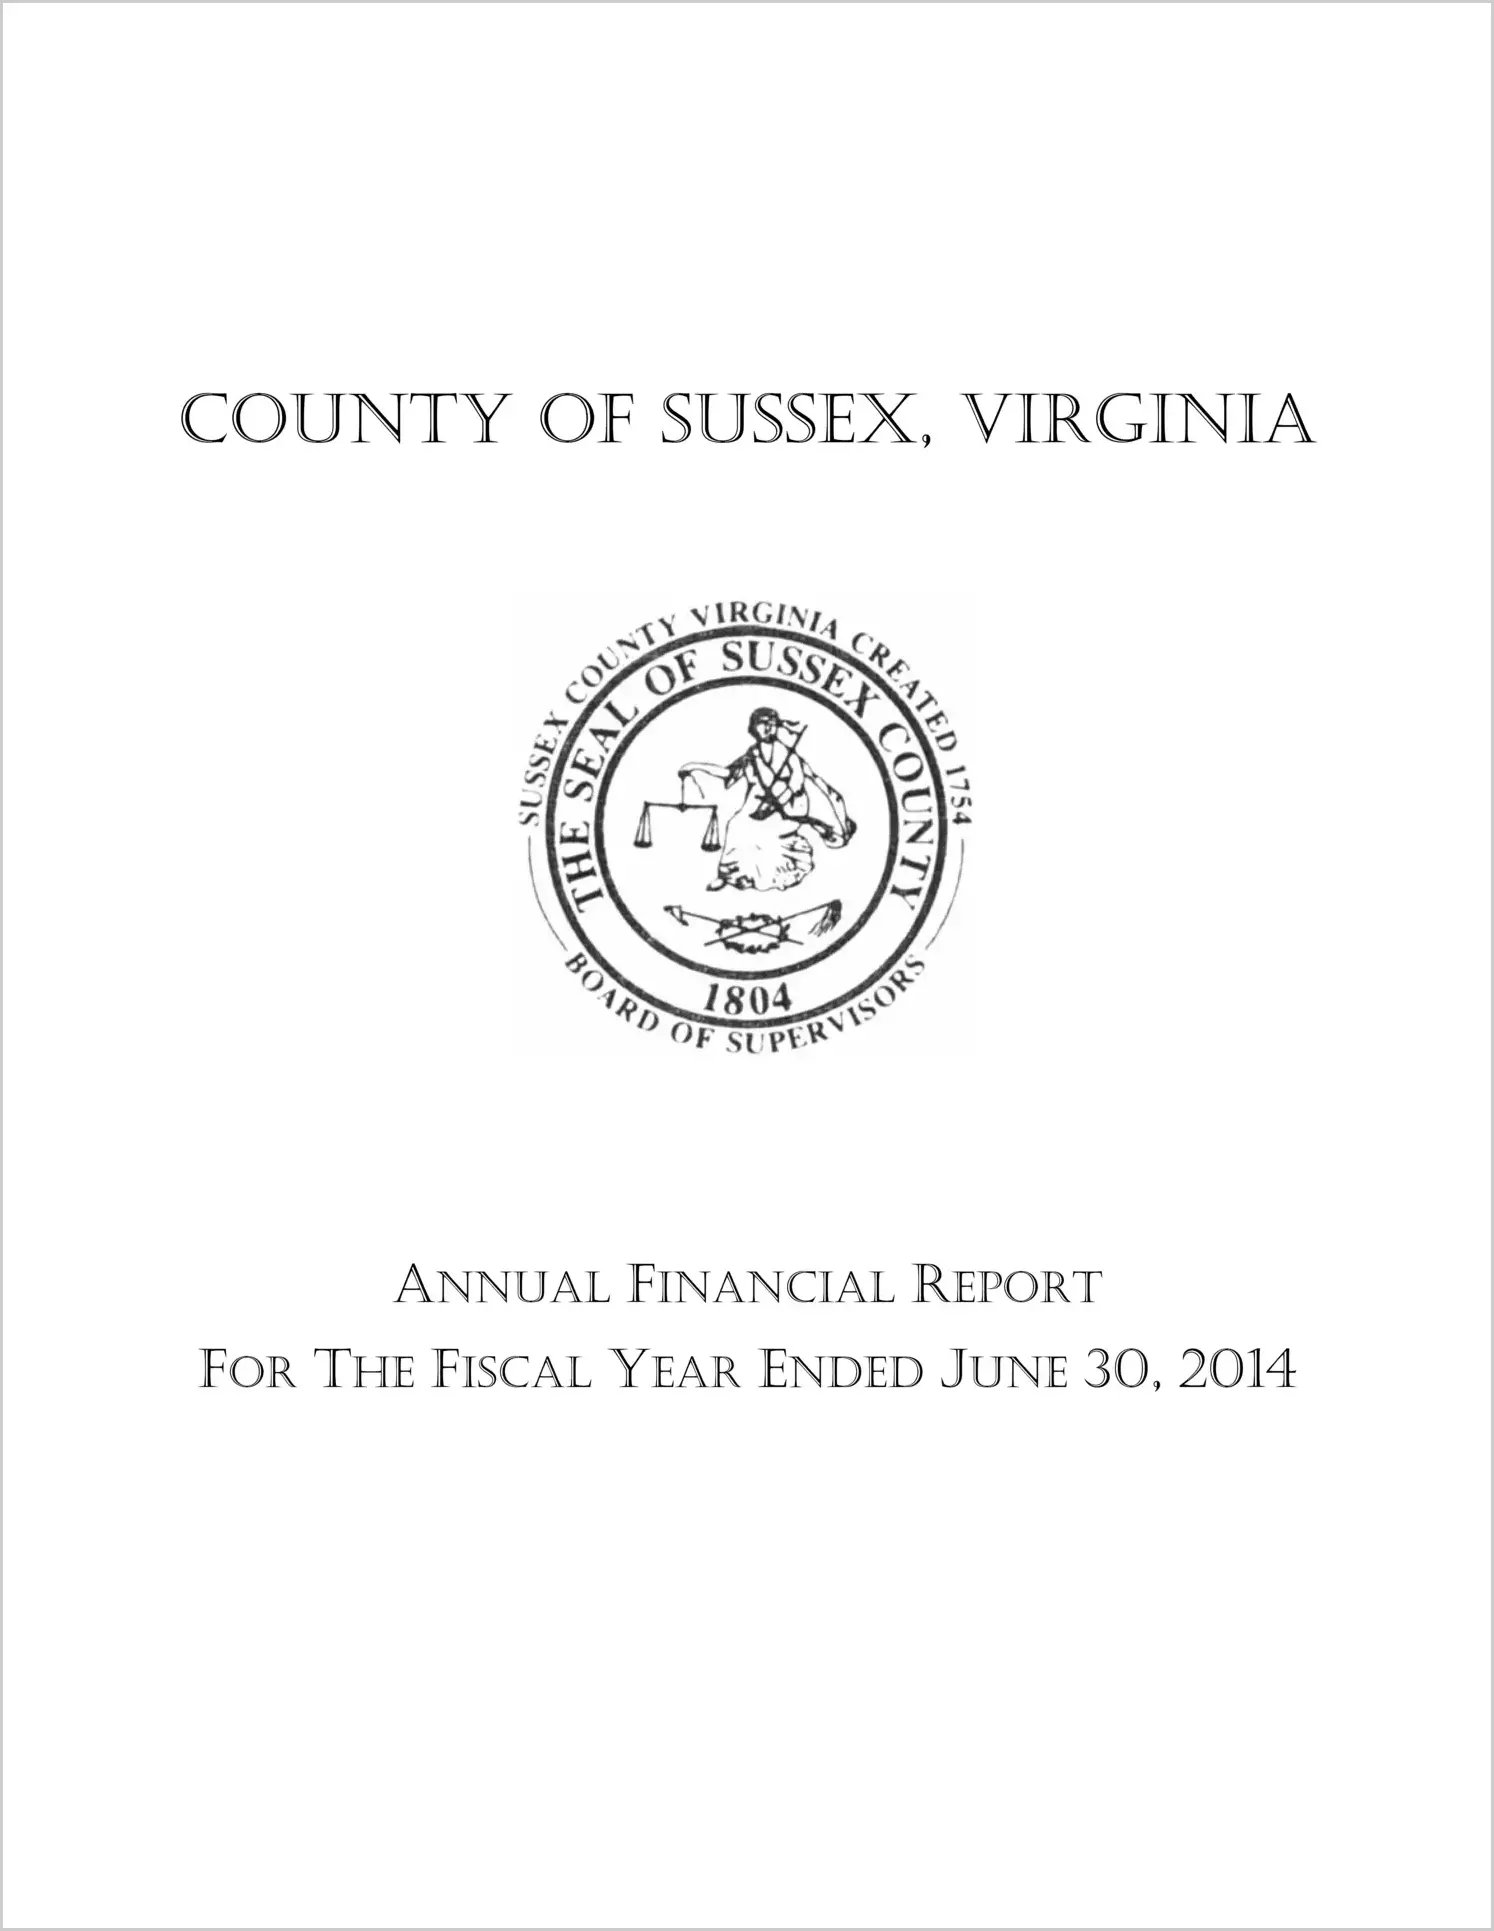 2014 Annual Financial Report for County of Sussex